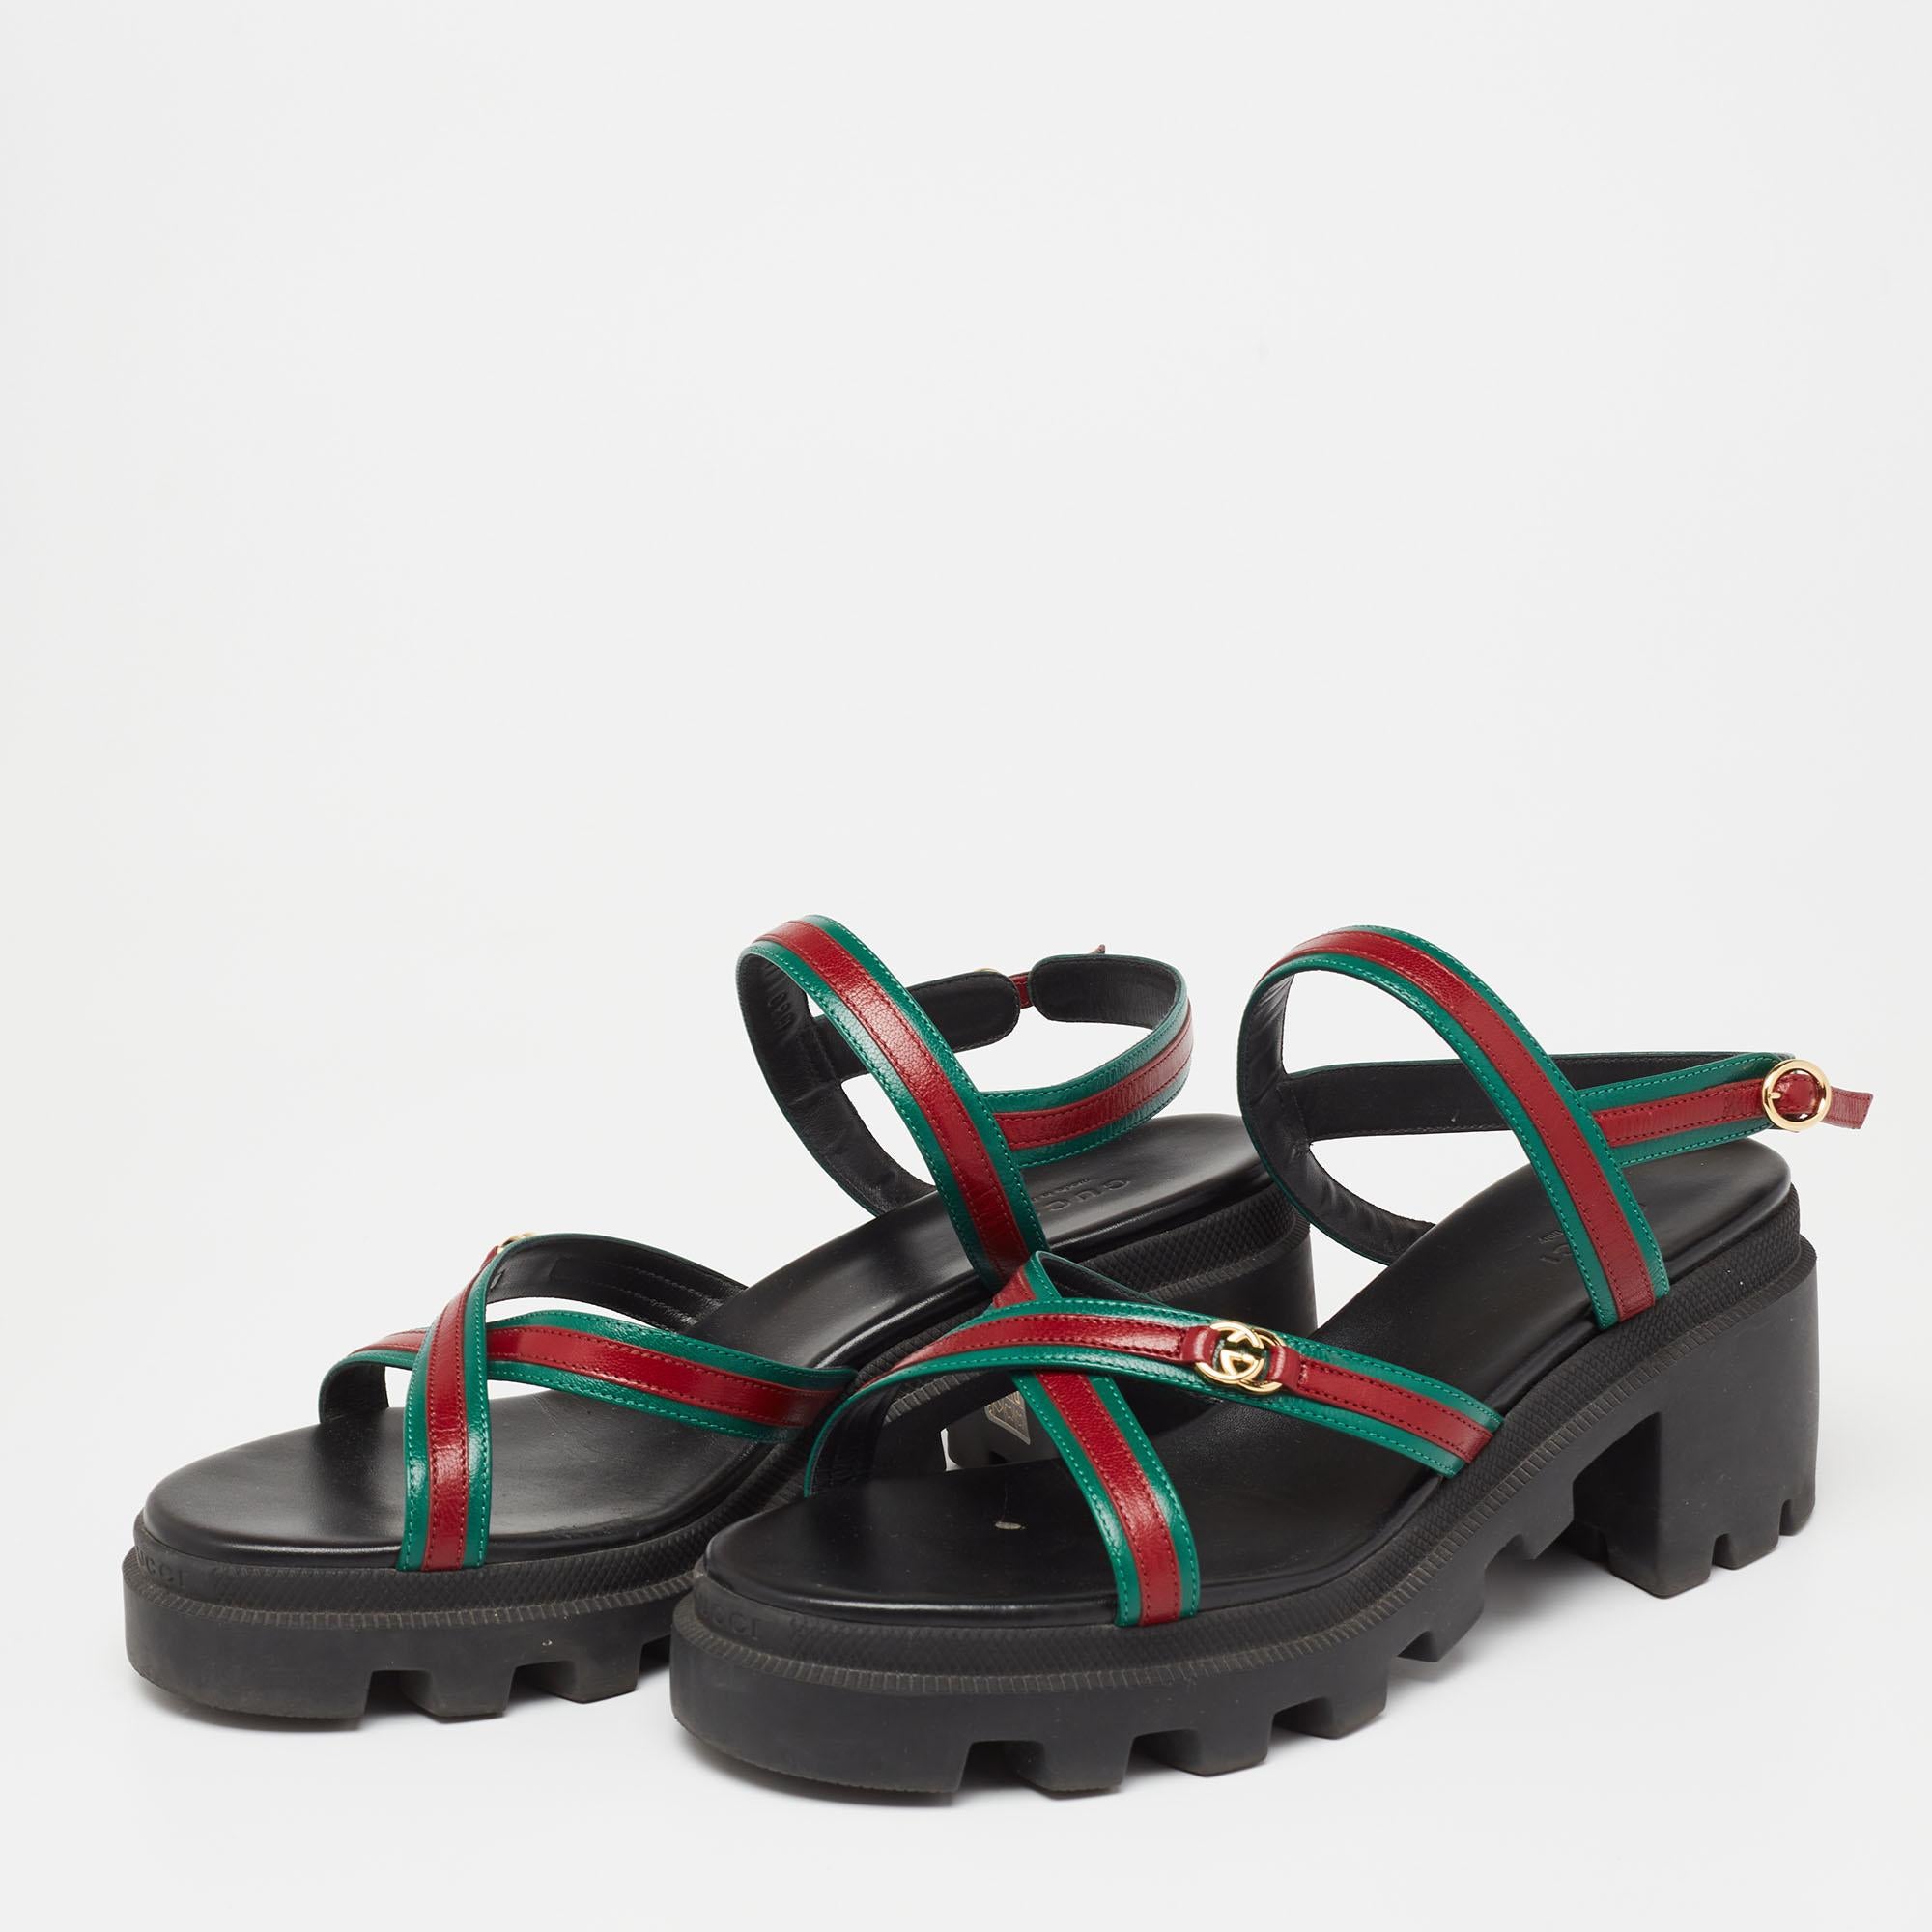 Sandals are a must-have for any season, but especially for the summer. This pair by Gucci is perfect for long summer days and eventful nights. An ideal daily wear companion, these sandals will help you nail the stylish look.